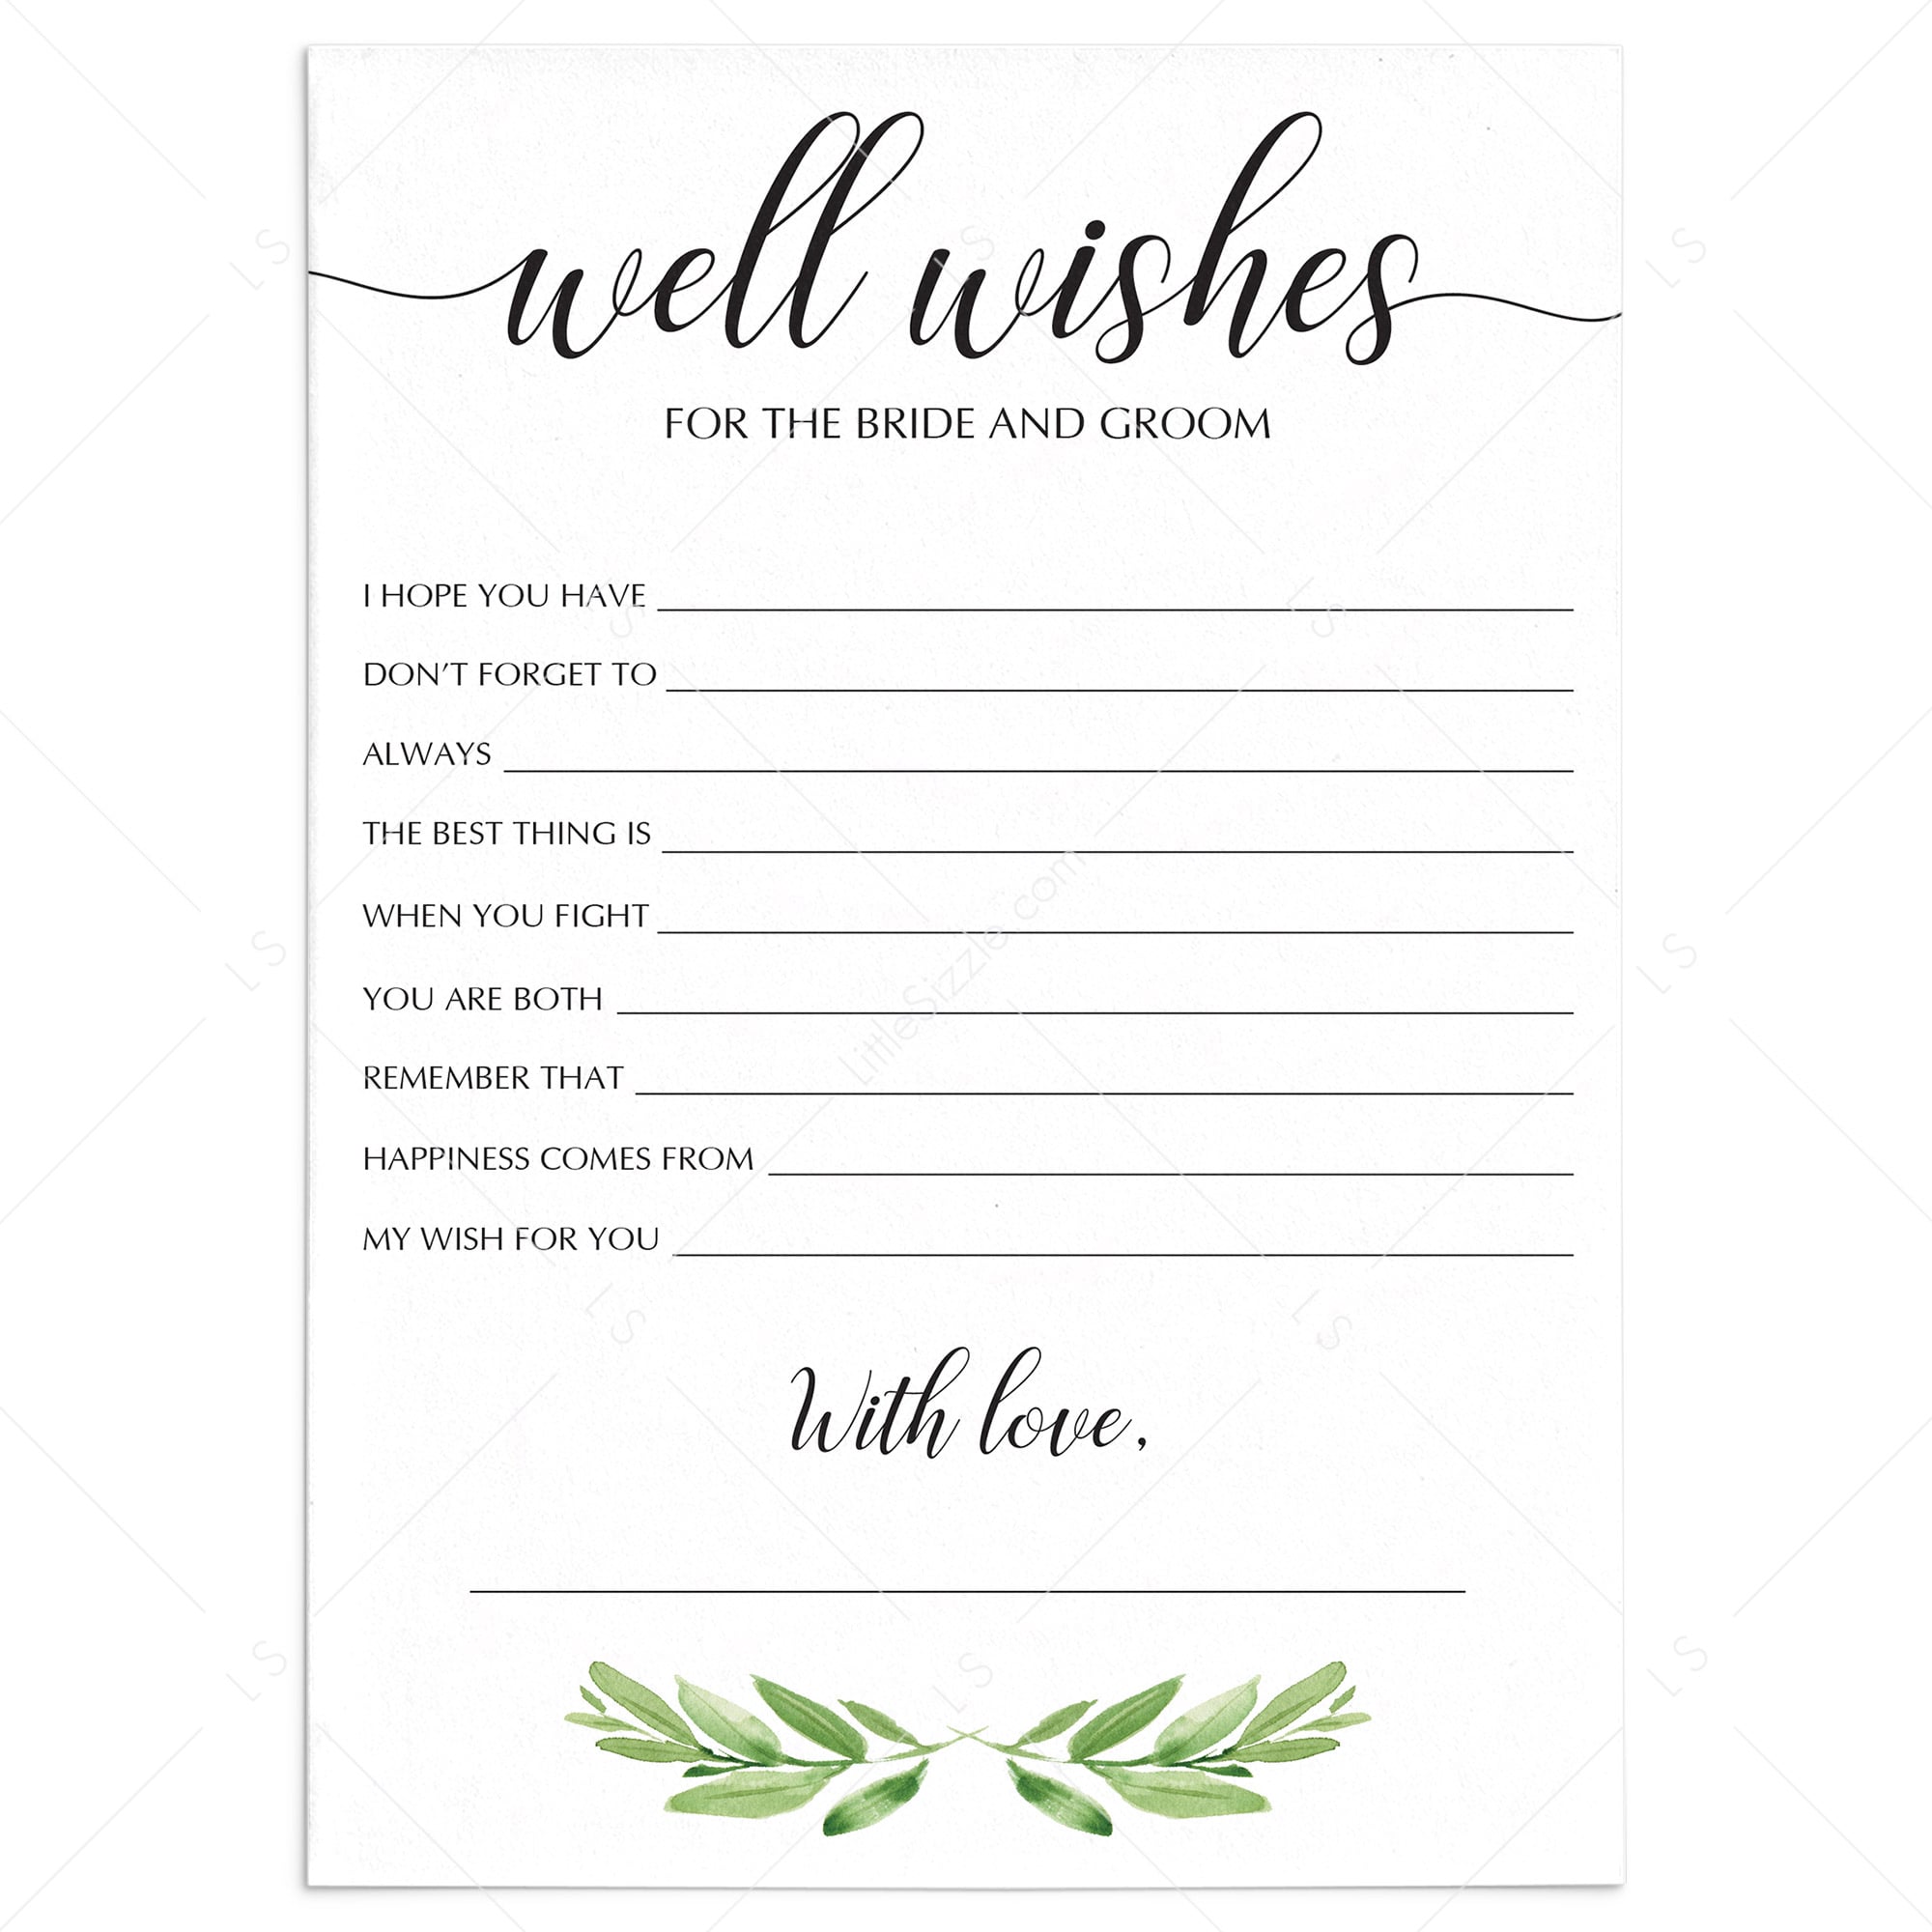 green advice and wishes for the newly weds by LittleSizzle